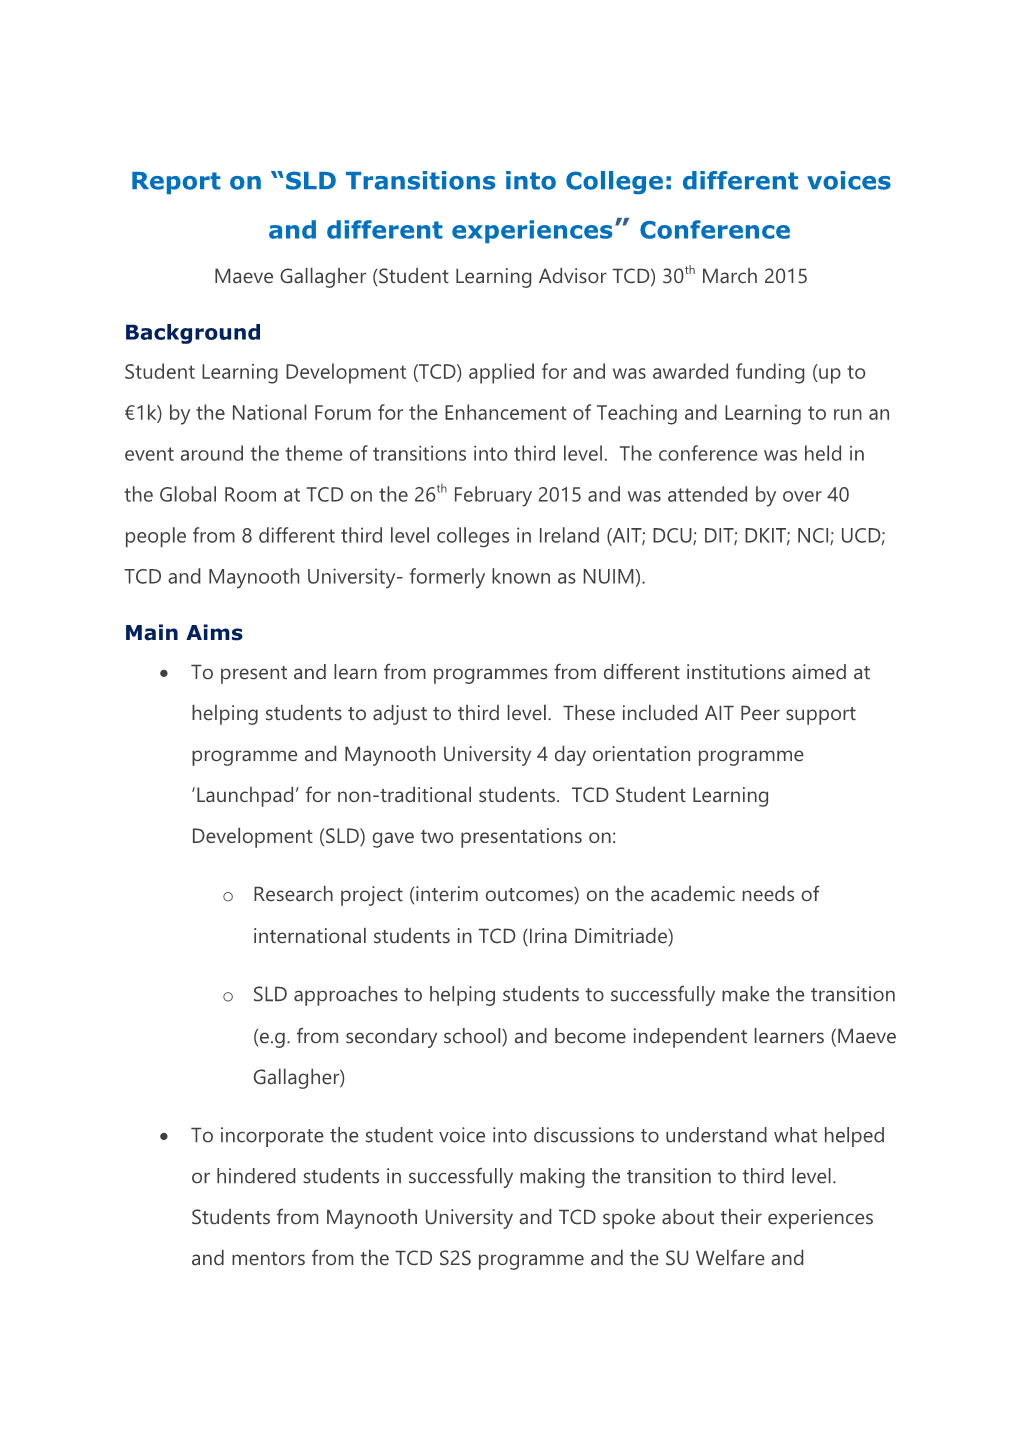 Report on SLD Transitions Into College: Different Voices and Different Experiences Conference